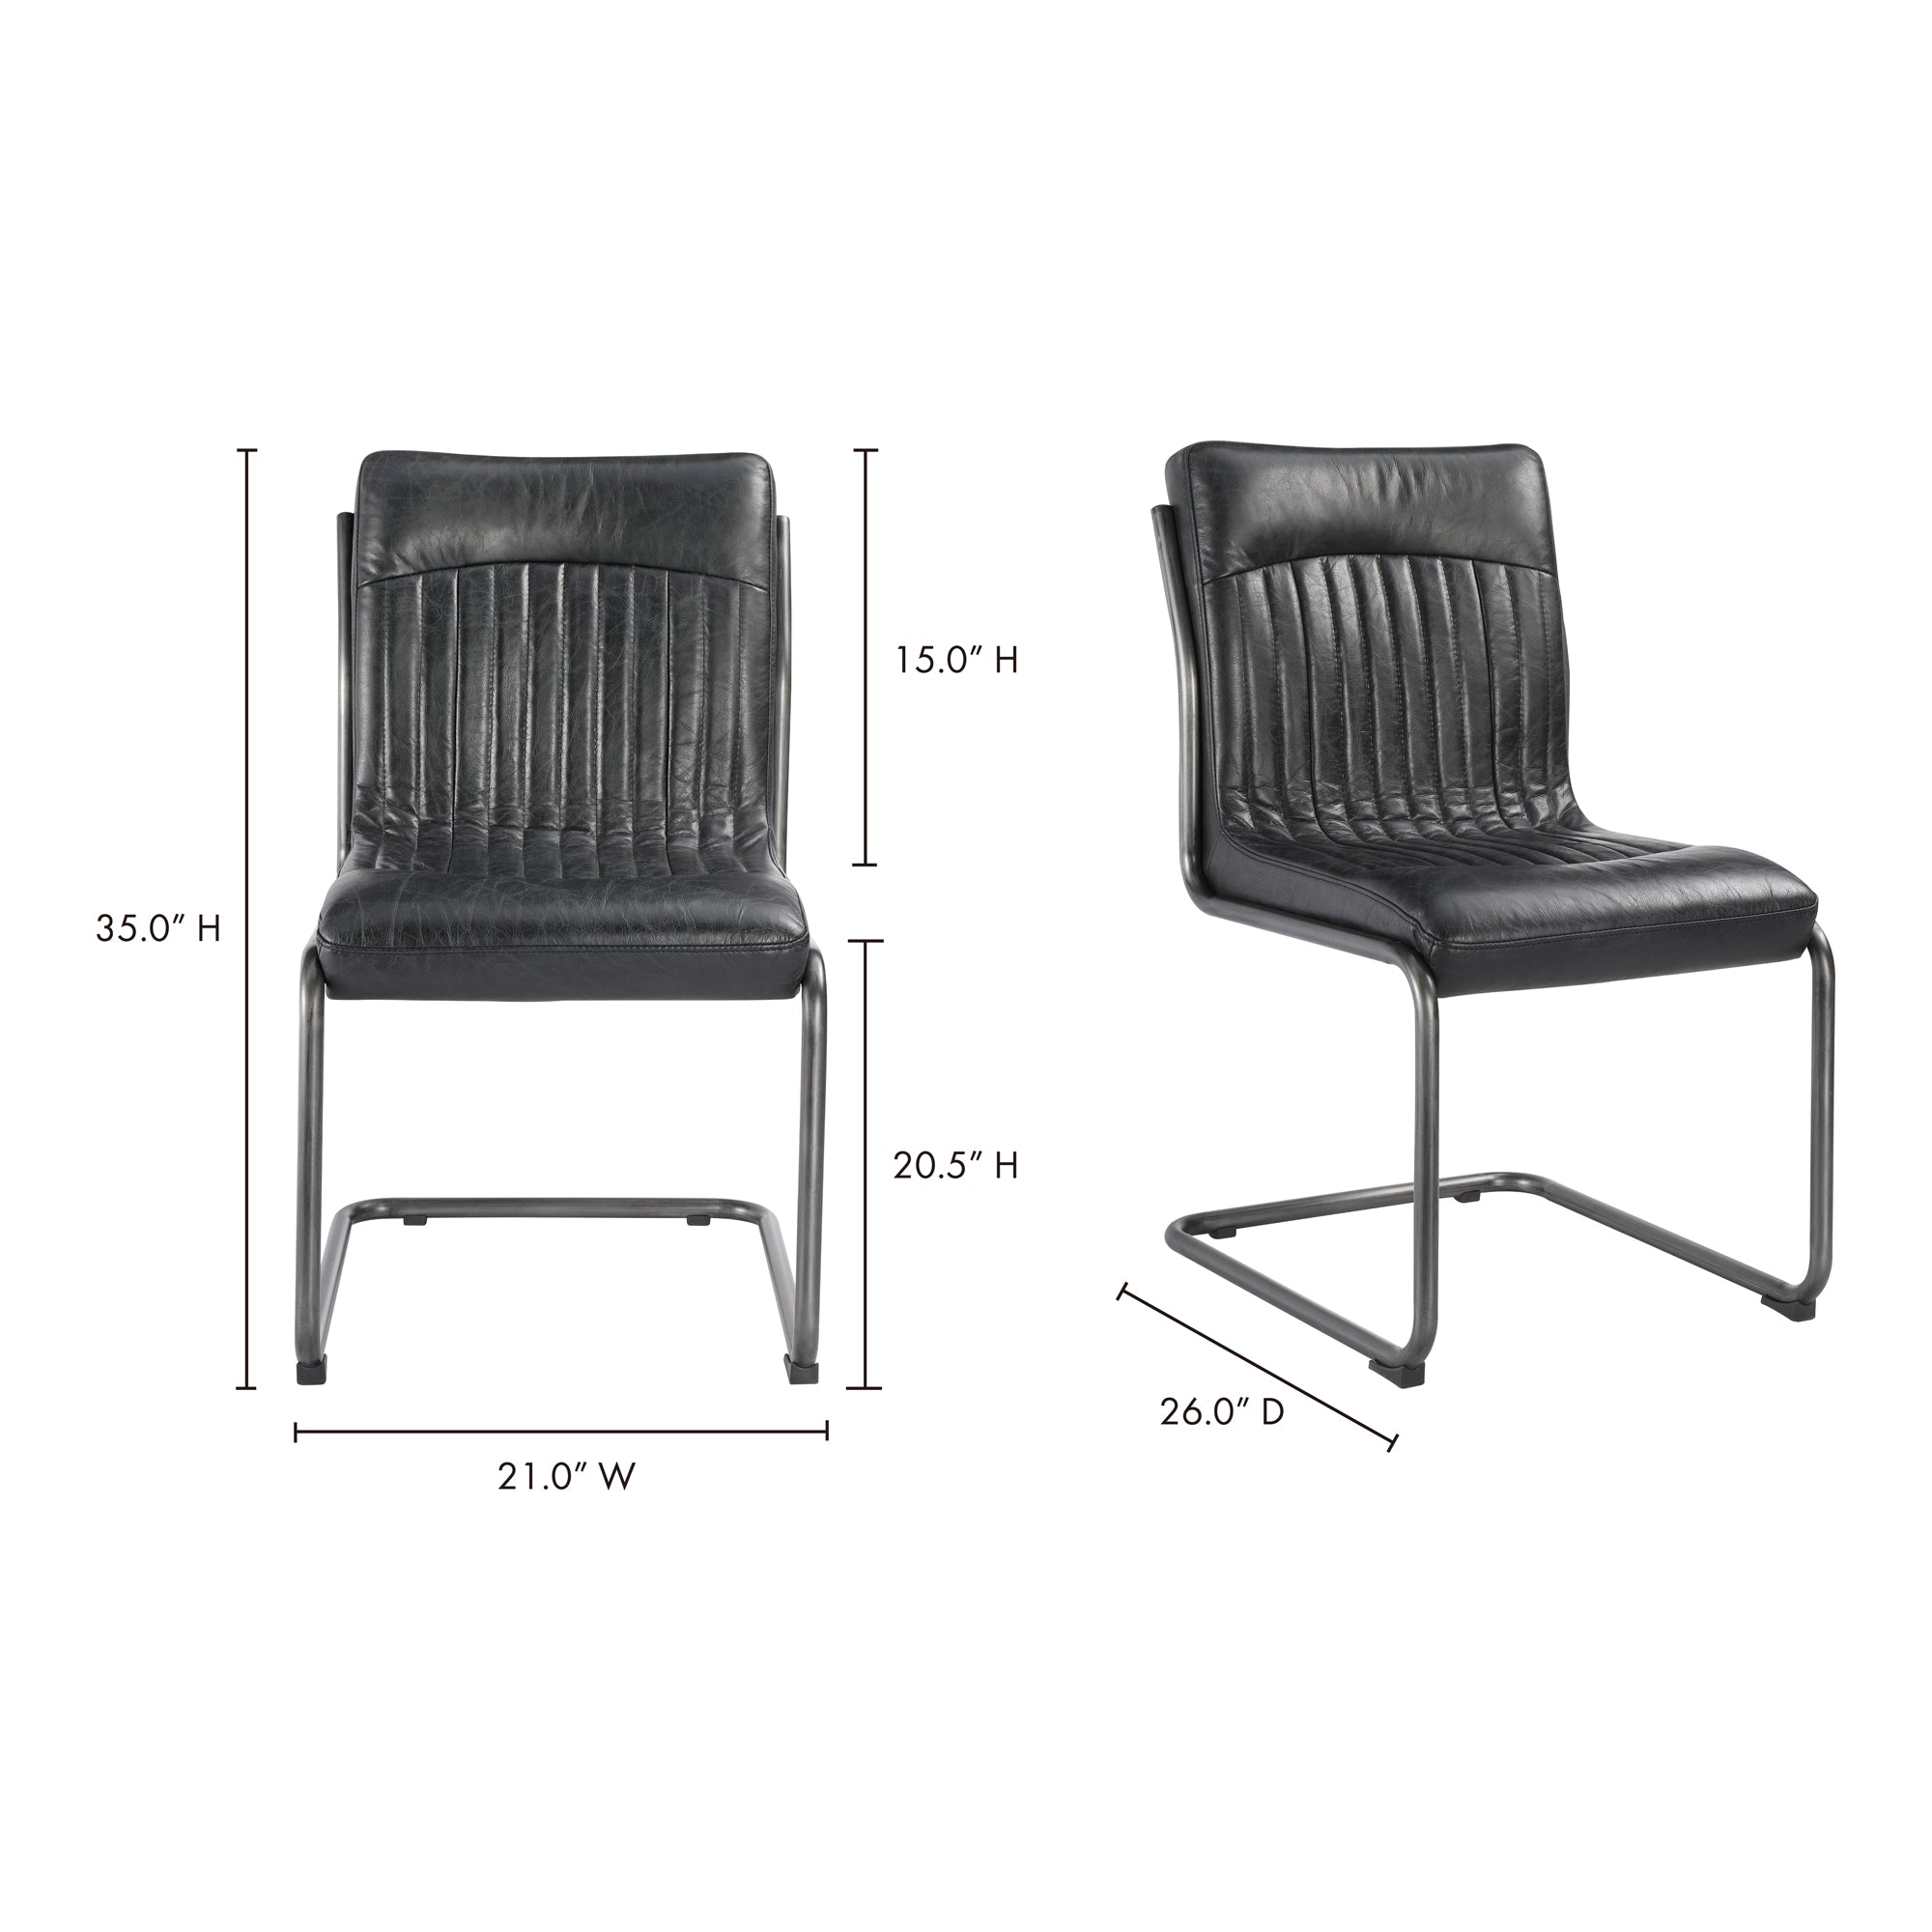 Ansel Dining Chair Onyx Black Leather - Set Of Two